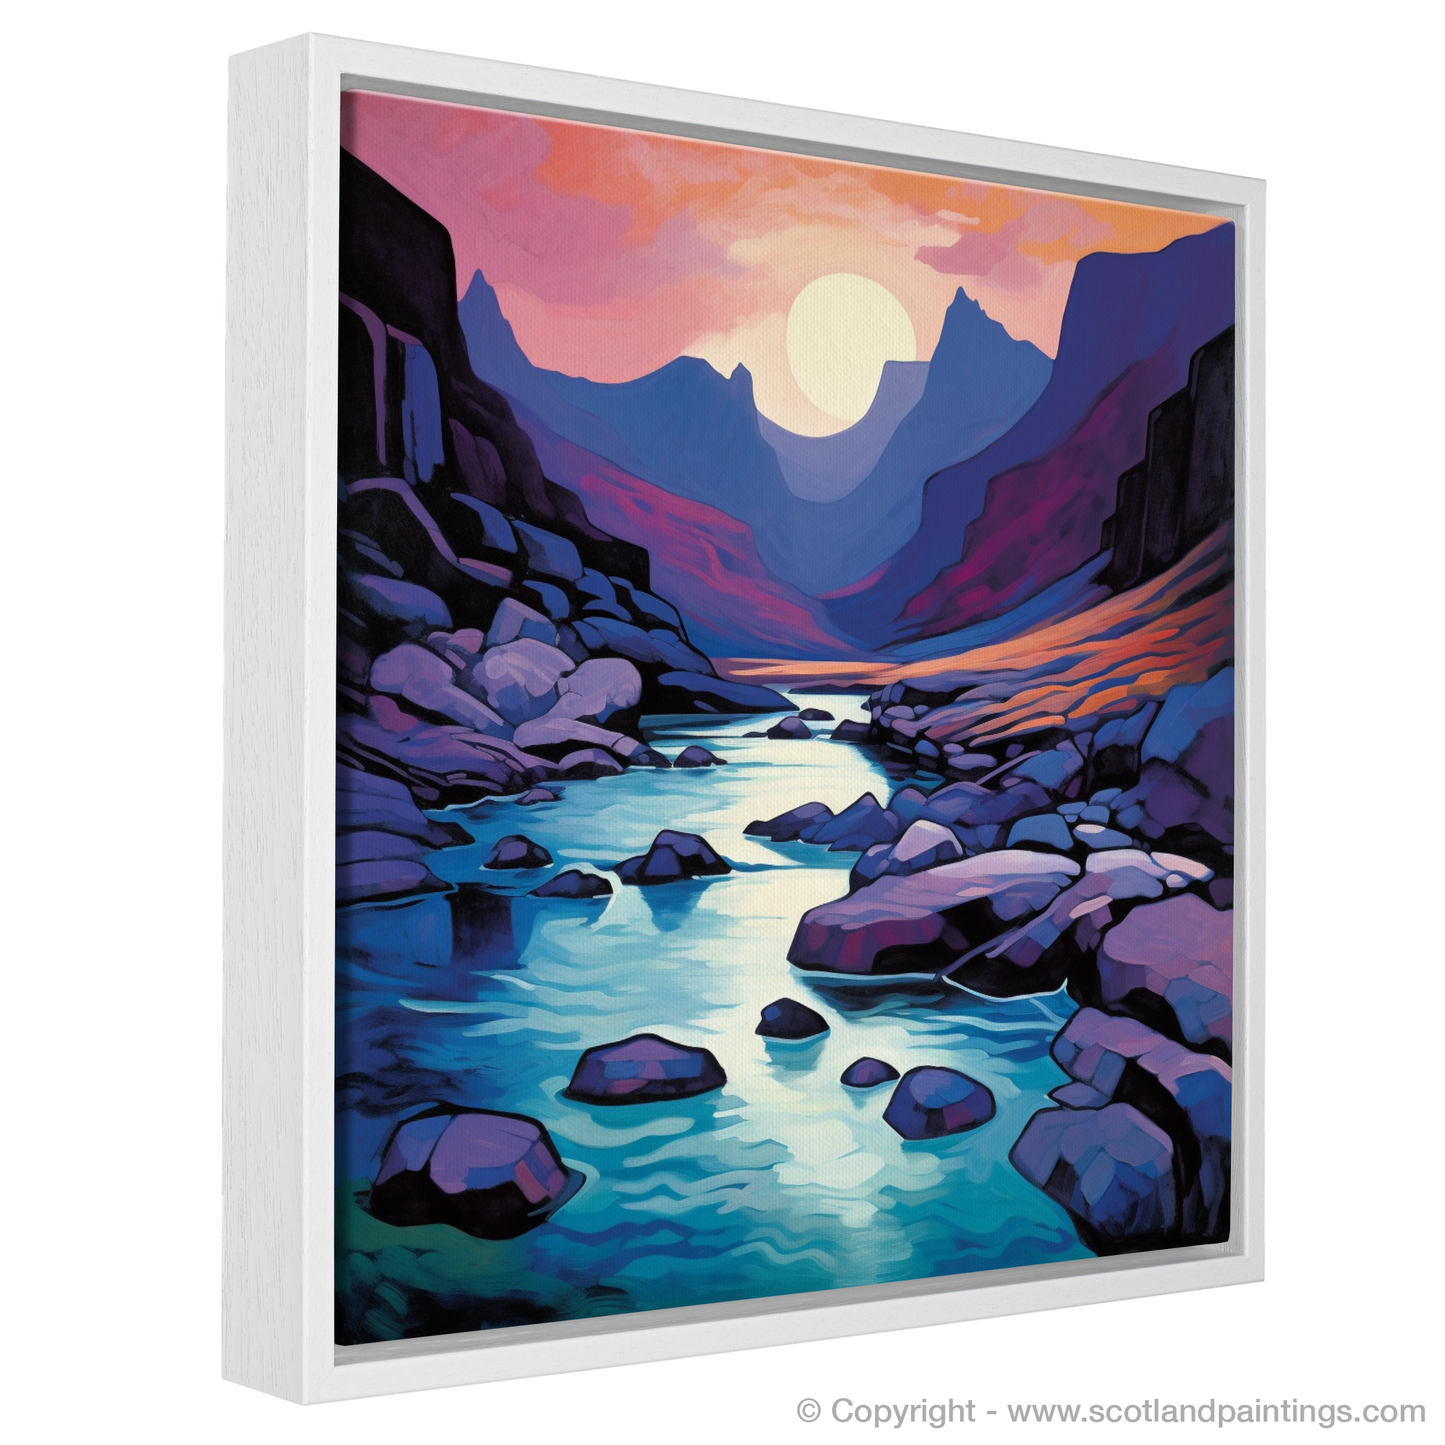 Fairy Pools Dusk Reverie: A Fauvist Ode to Skye's Wilderness